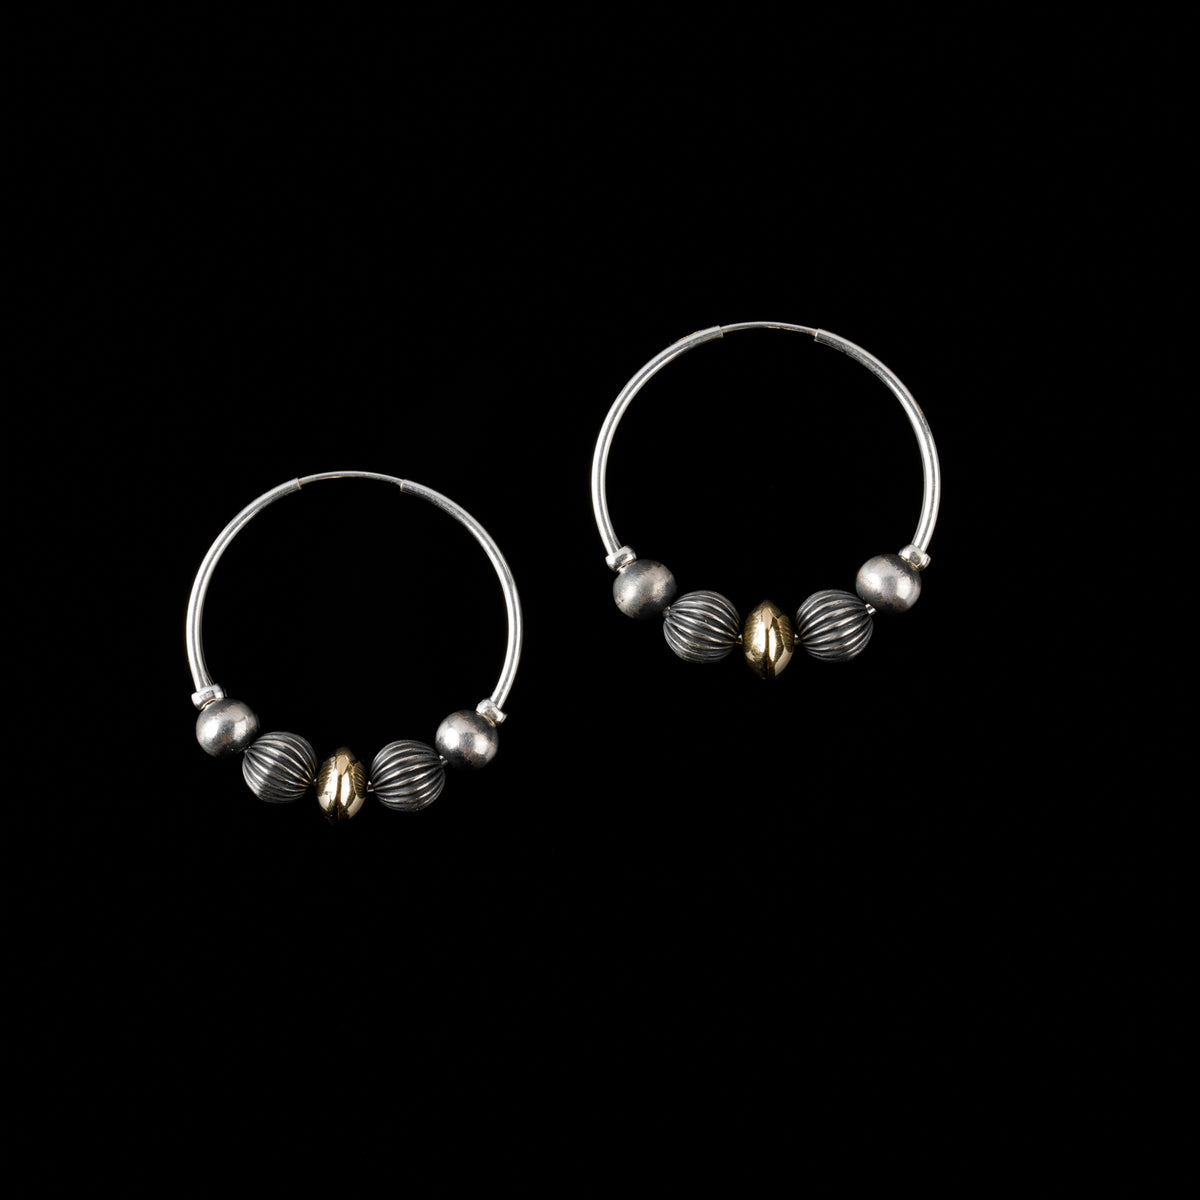 14k Gold Sterling Silver Hoops with Corrugated Rondelle Beads